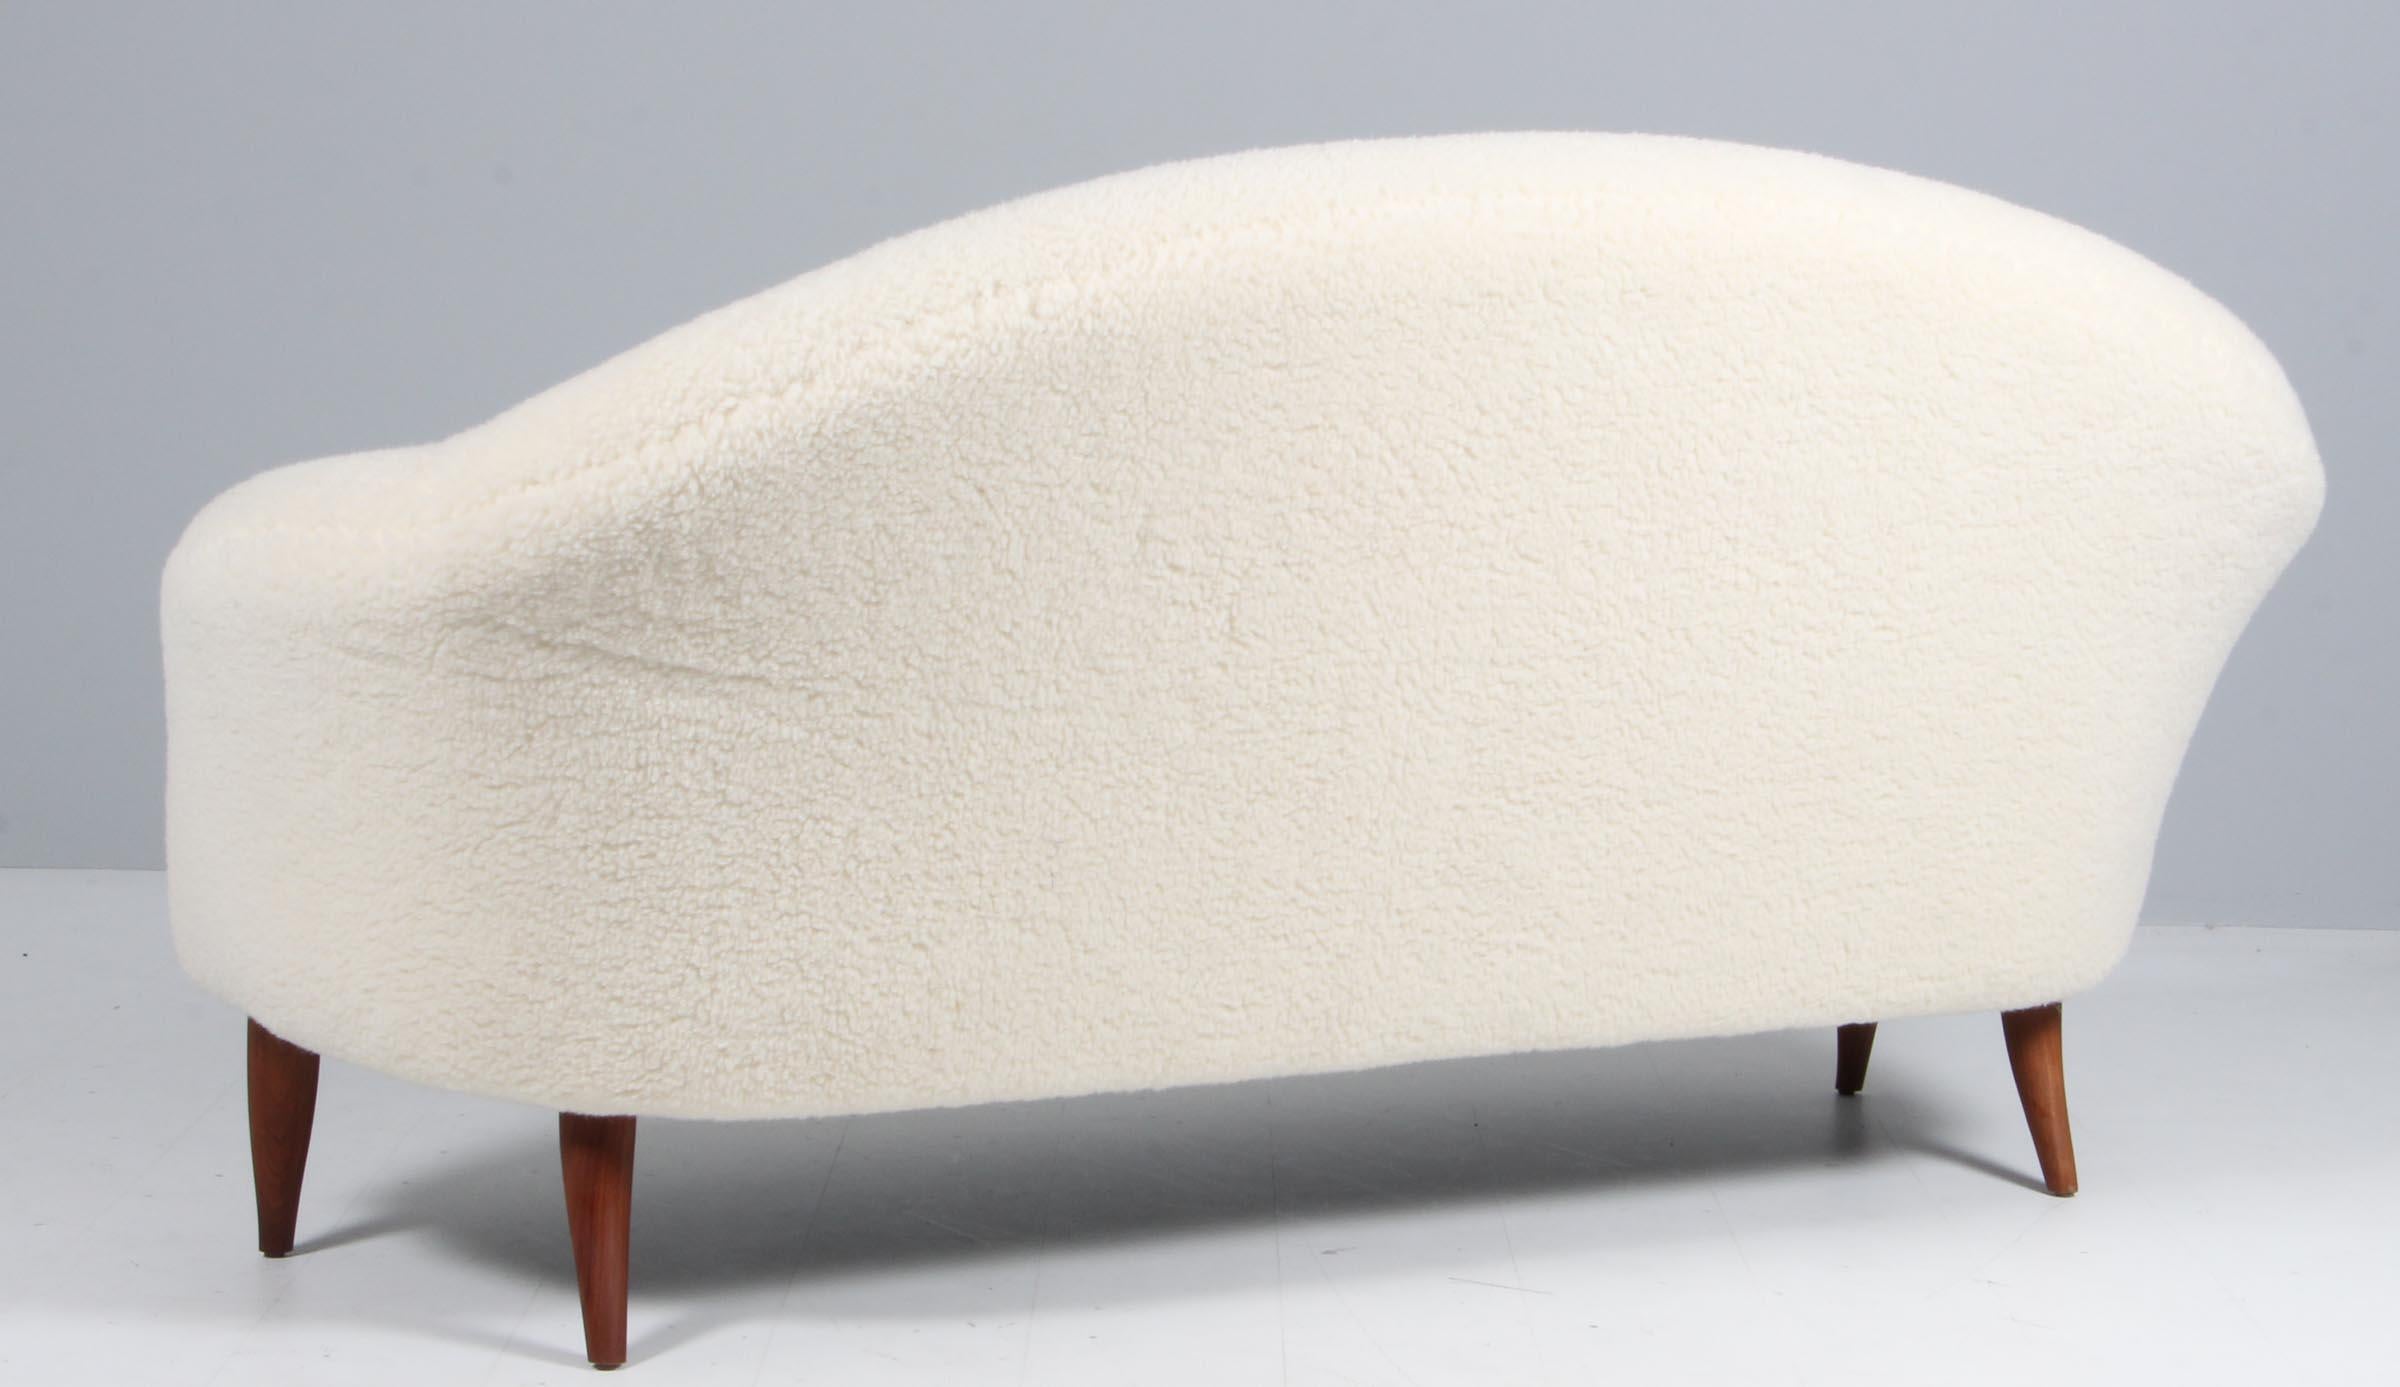 Kerstin Horlin Holmquist is a Swedish designer. This sofa was made for Nordiska Kompaniet in the 1950's. This was part of her Paradise design. This is the larger version. It features a soft curved line of the back and tapered and curved teak legs.